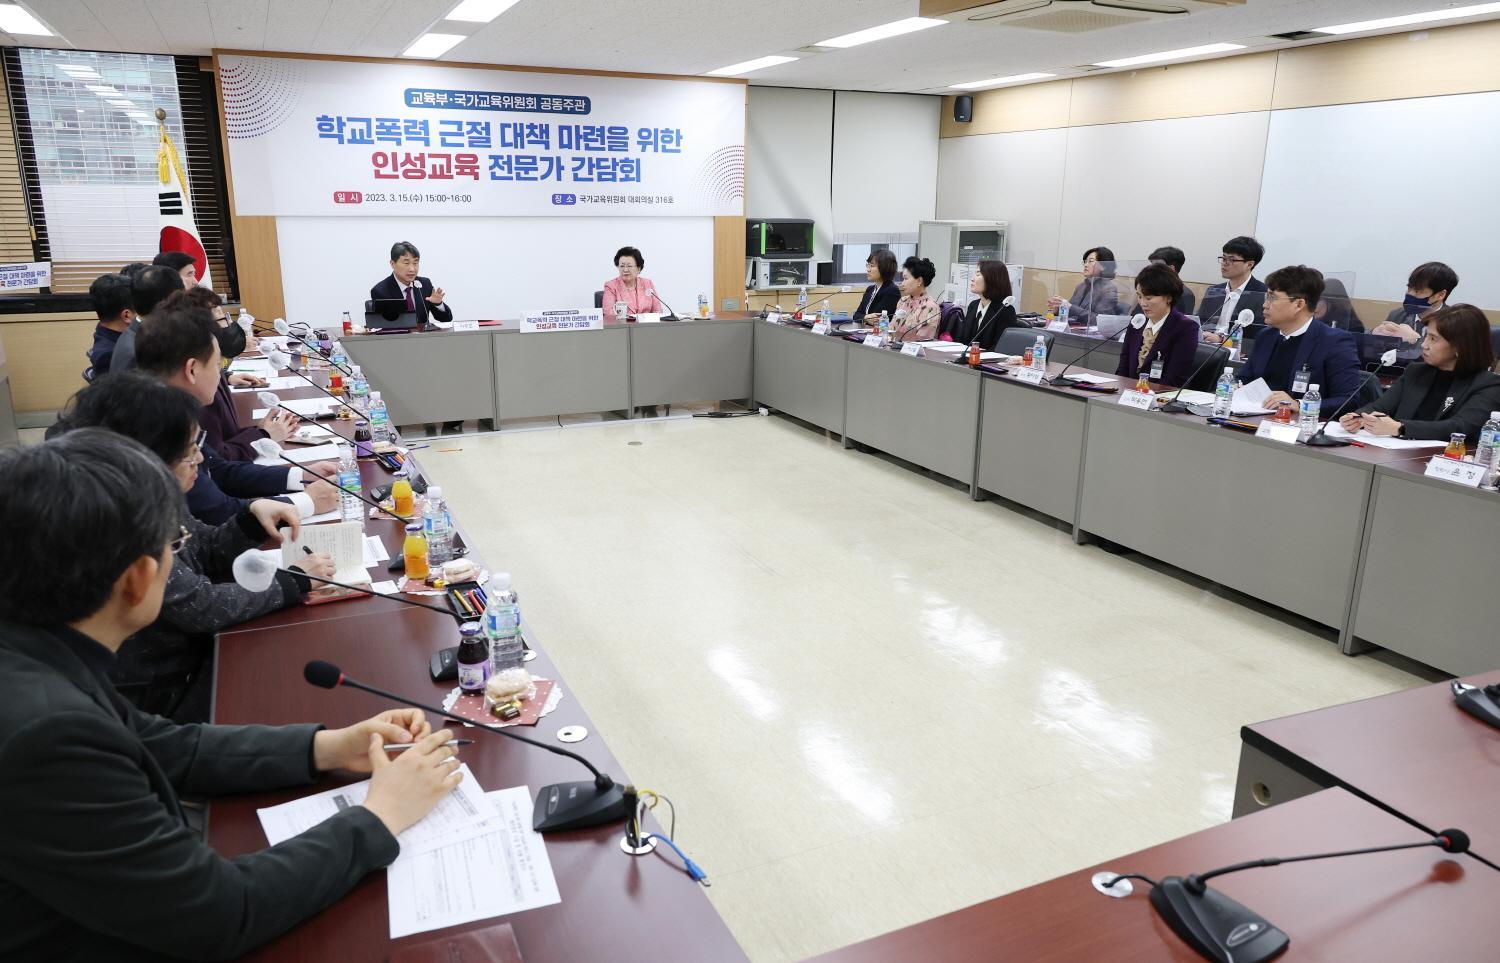 230315_Meeting with character education experts to eradicate school violence(2)